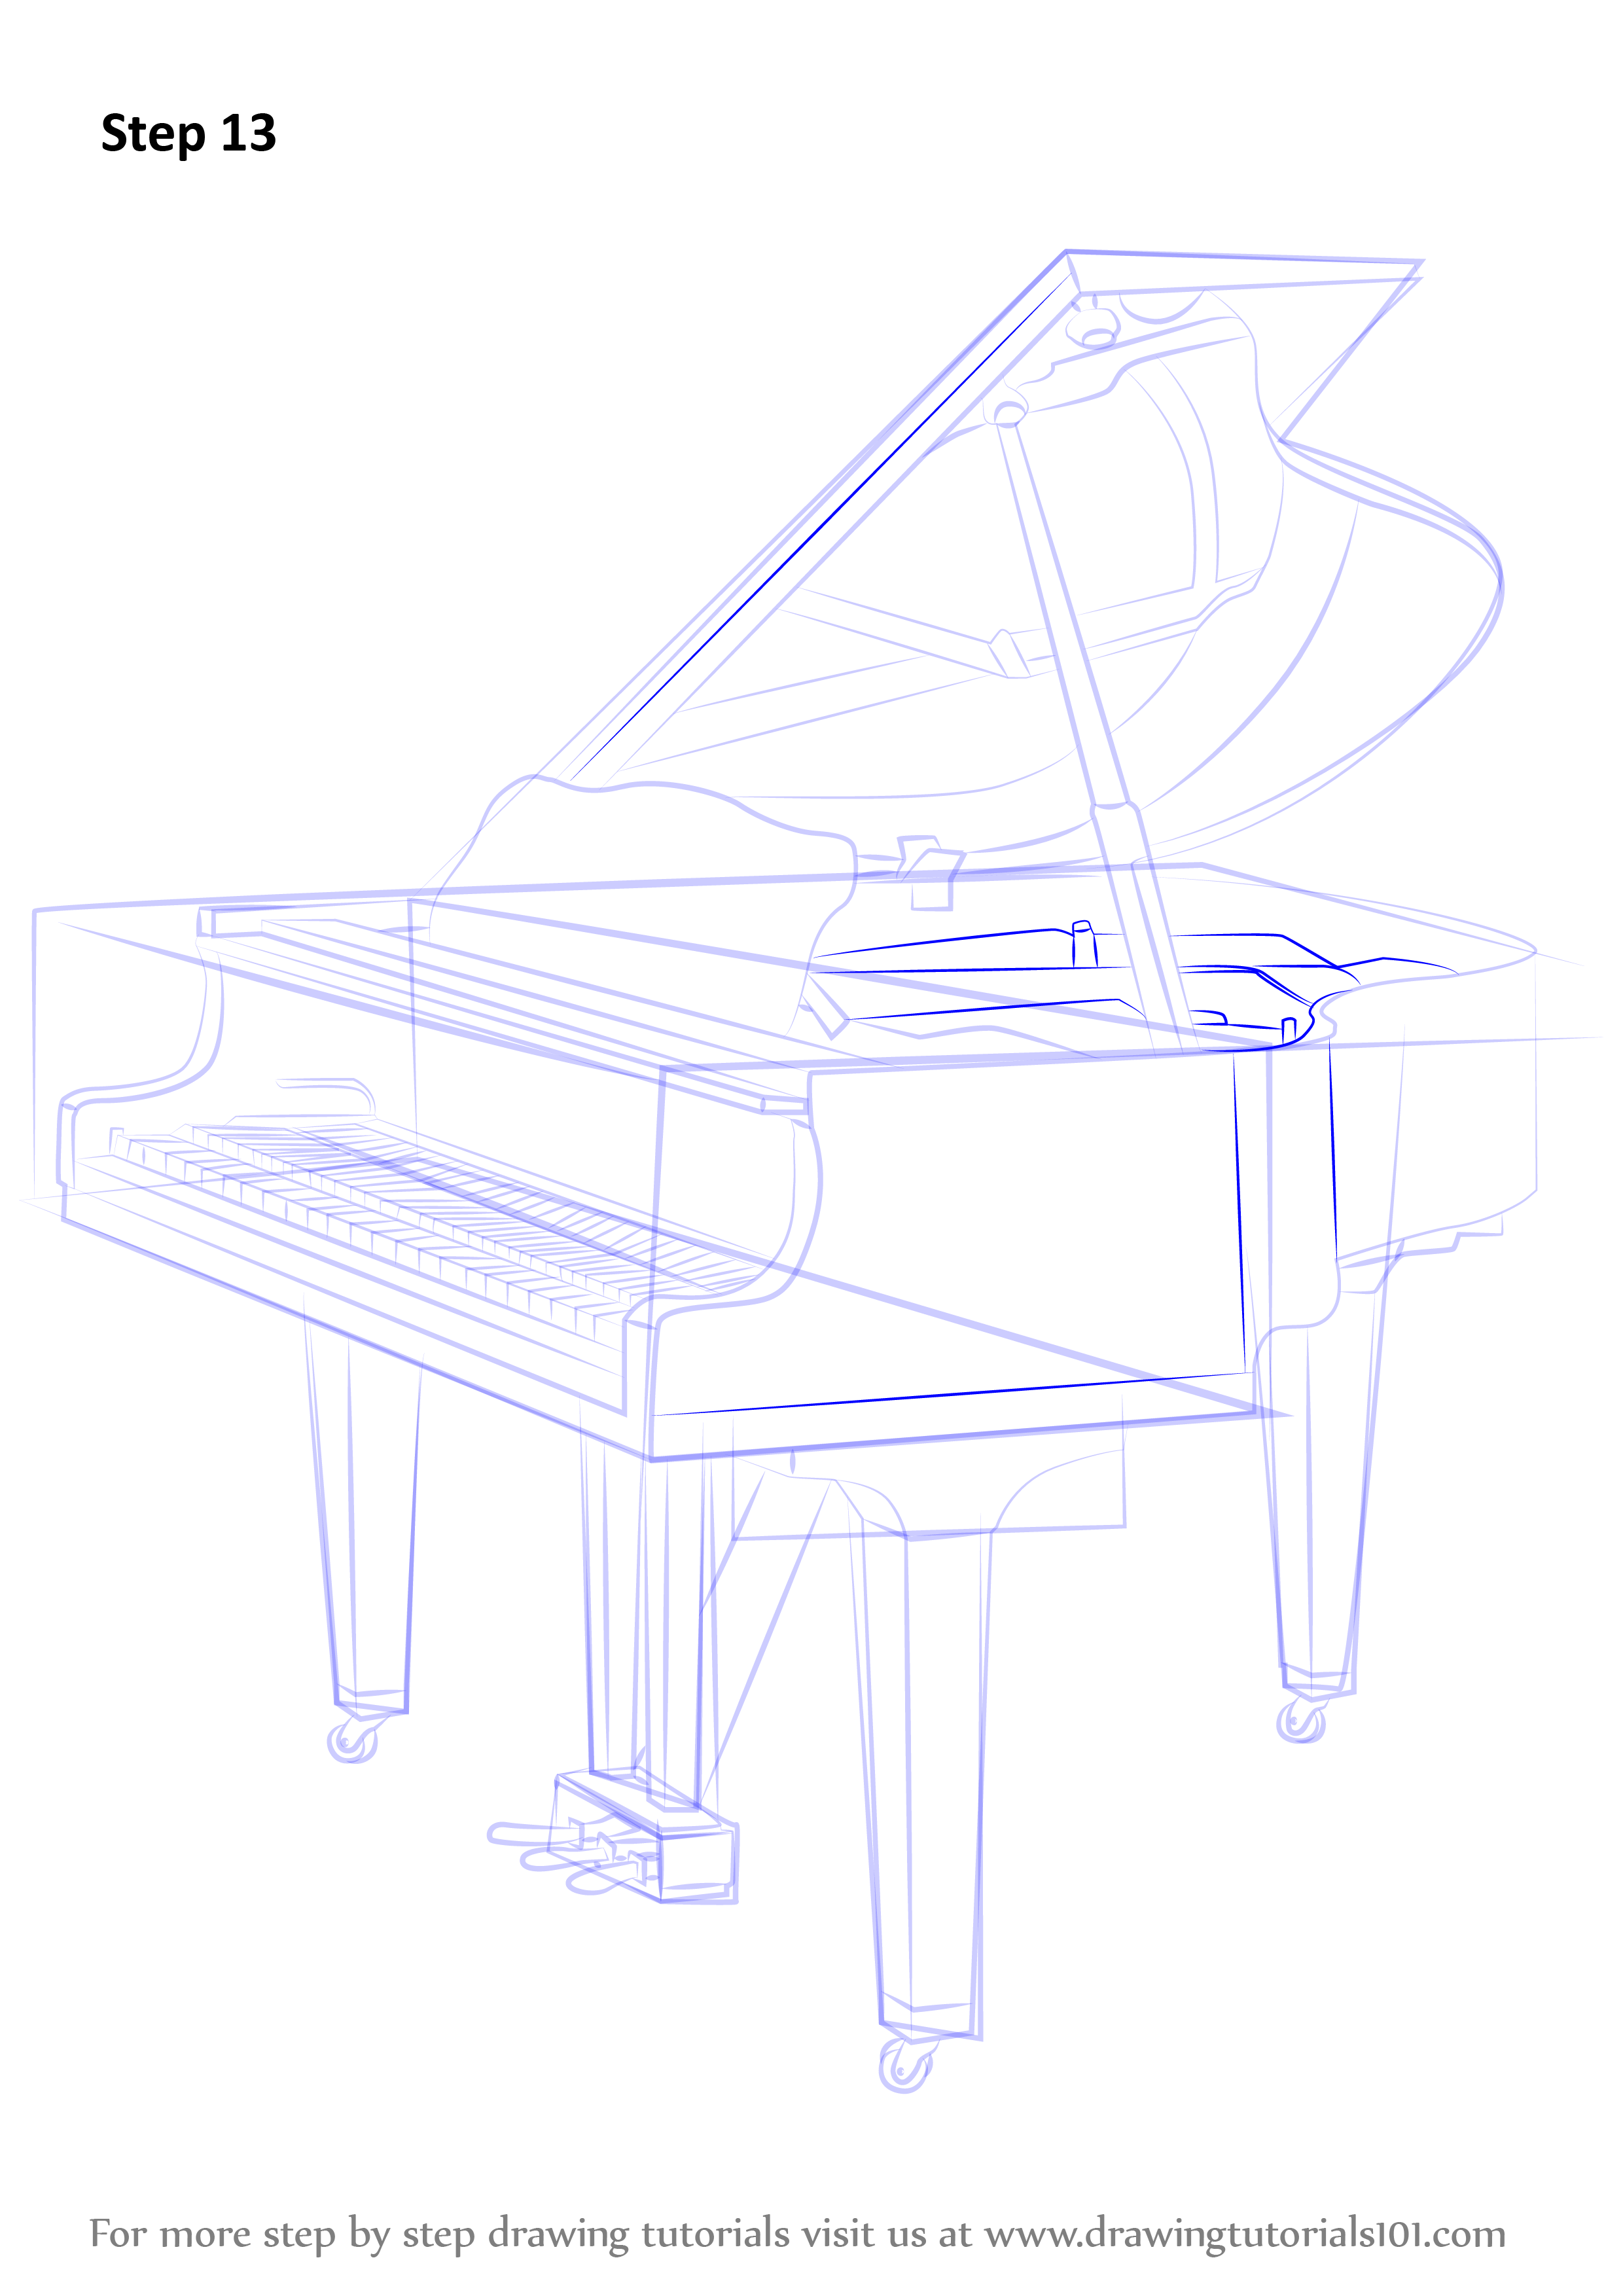 Learn How to Draw a Grand piano (Musical Instruments) Step by Step